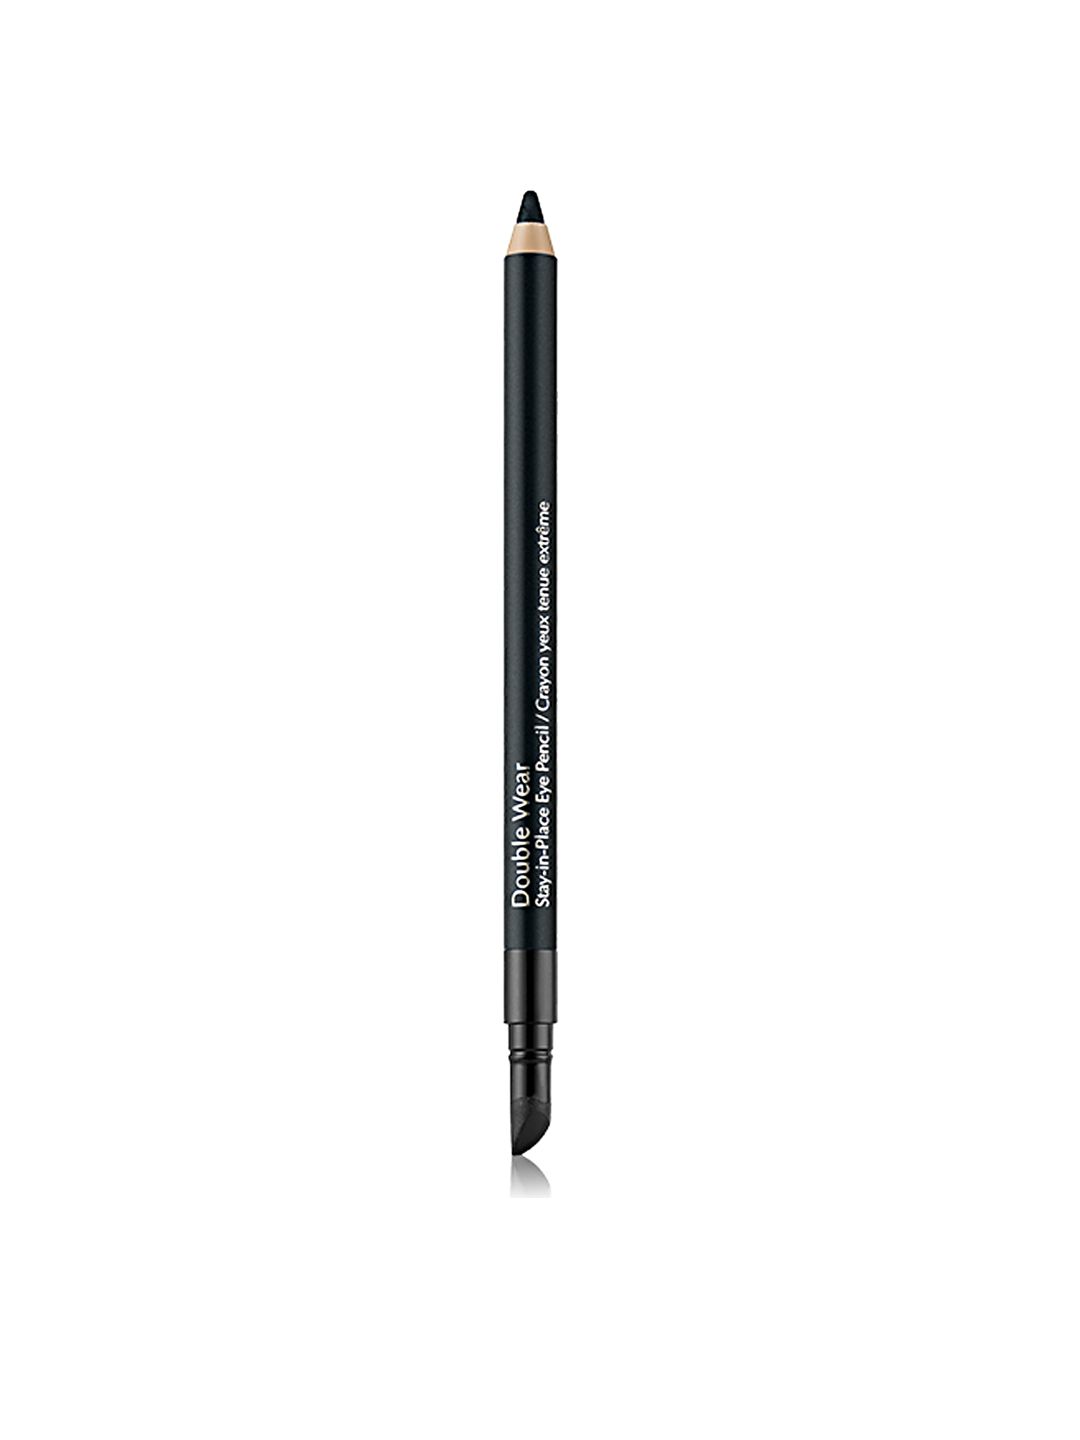 Estee Lauder Double Wear Stay-in-Place Eye Pencil - Onyx 1.2 g Price in India